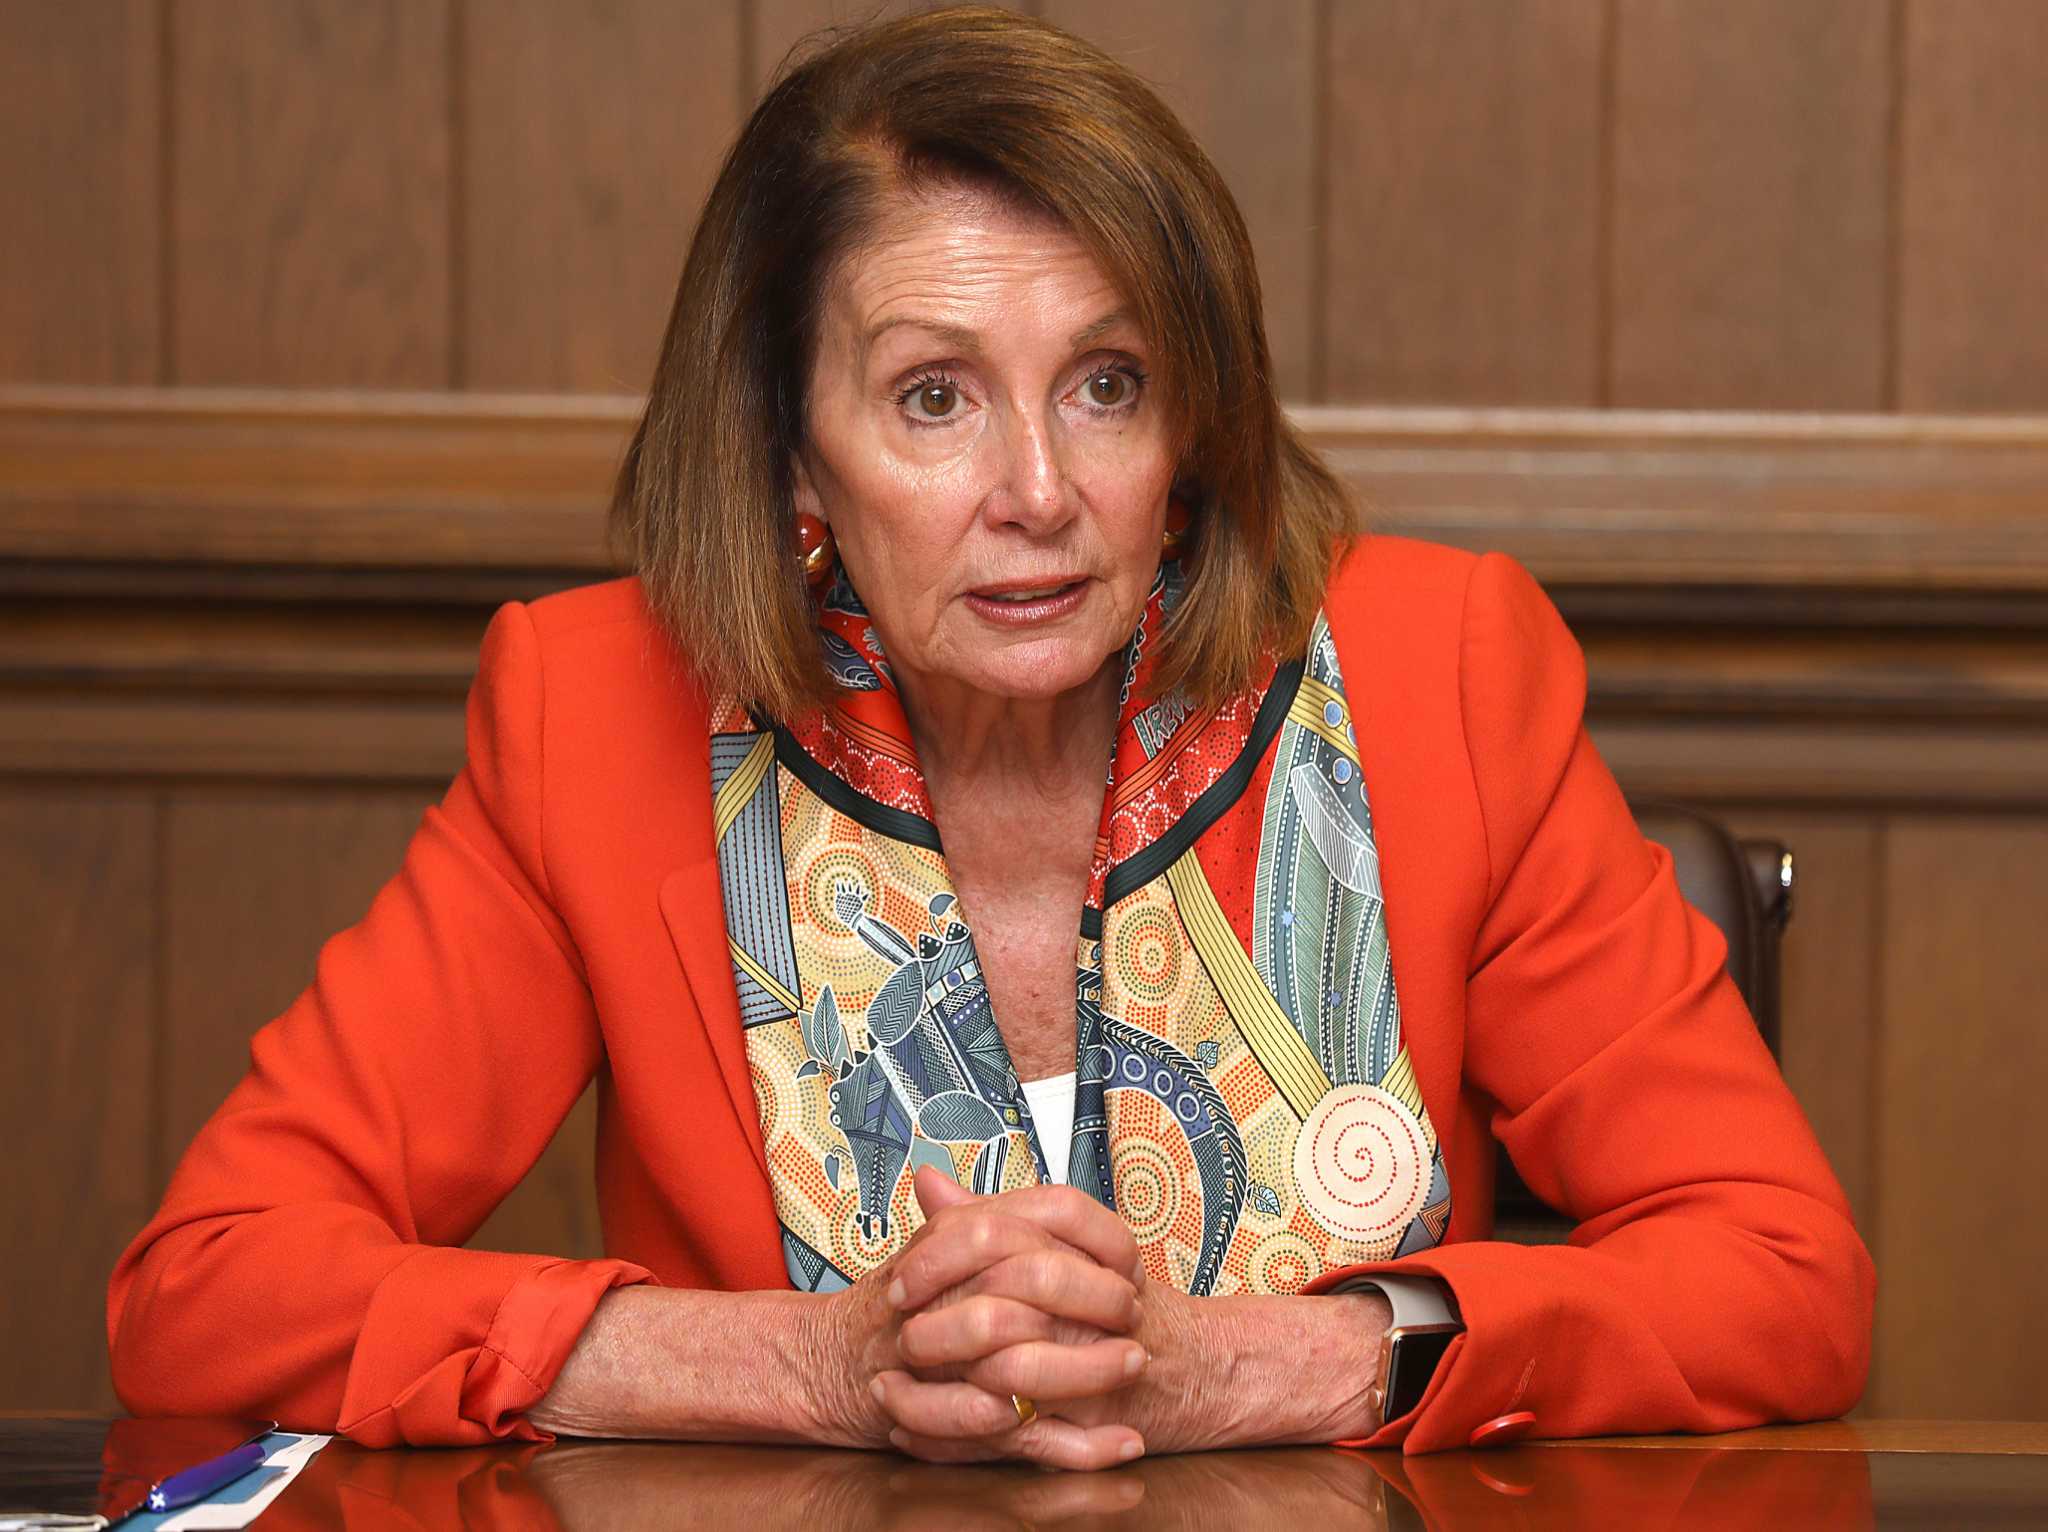 Pelosi: Trump’s tax returns are fair game if Democrats win House - SFChronicle.com